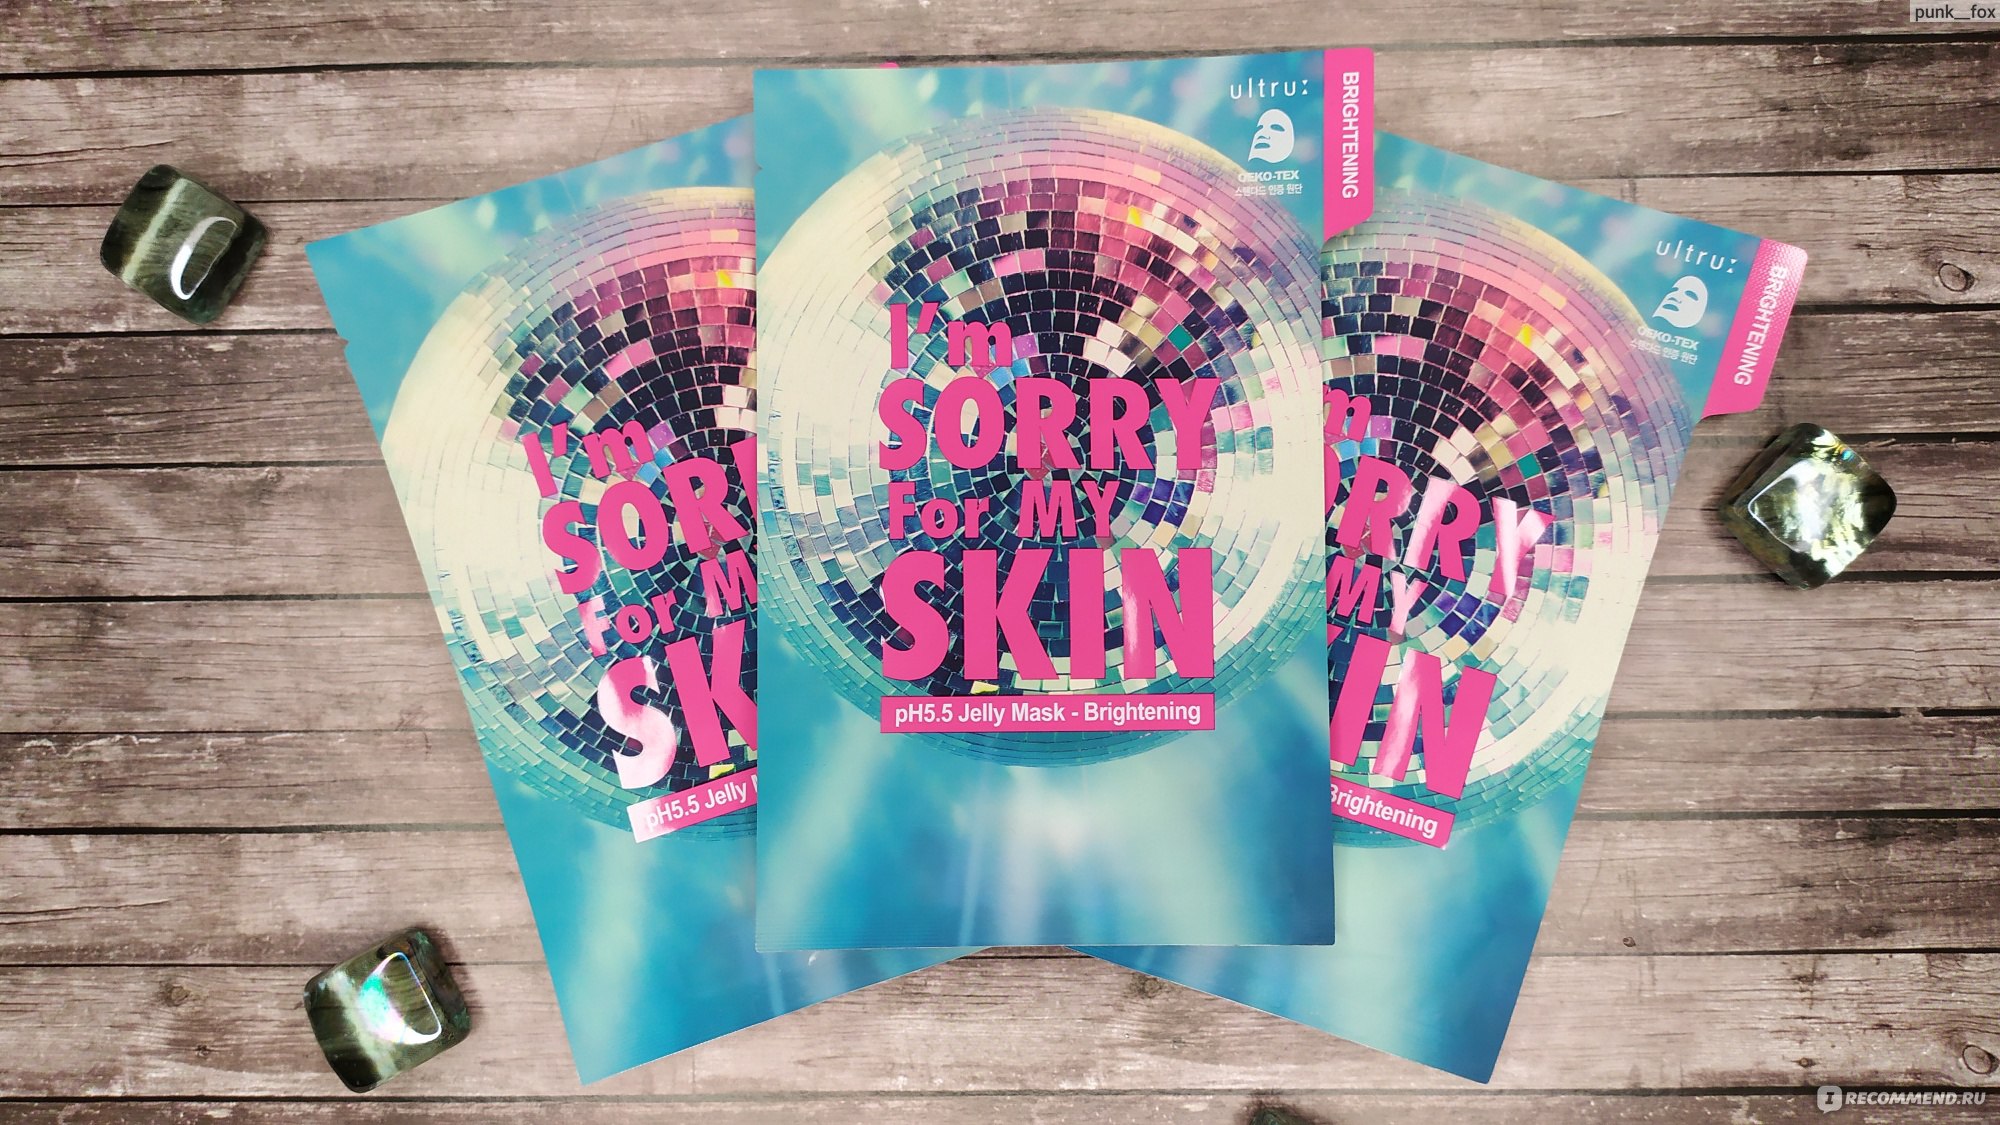 5 jelly. Маска для лица im sorry for my Skin PH 5.5 Jelly Mask-Brightening. Маска тканево-гелевая i'm sorry for my Skin PH 5,5 Jelly Mask - Brightening (Disco)(33 мл). Маска для лица тканевая i`m sorry for my Skin Jelly Mask Brightening осветляющая 33мл. I'M sorry for my Skin. Тканевая маска PH5.5 для сияния кожи, PH5.5 Jelly Mask - Brigh, 33 мл..